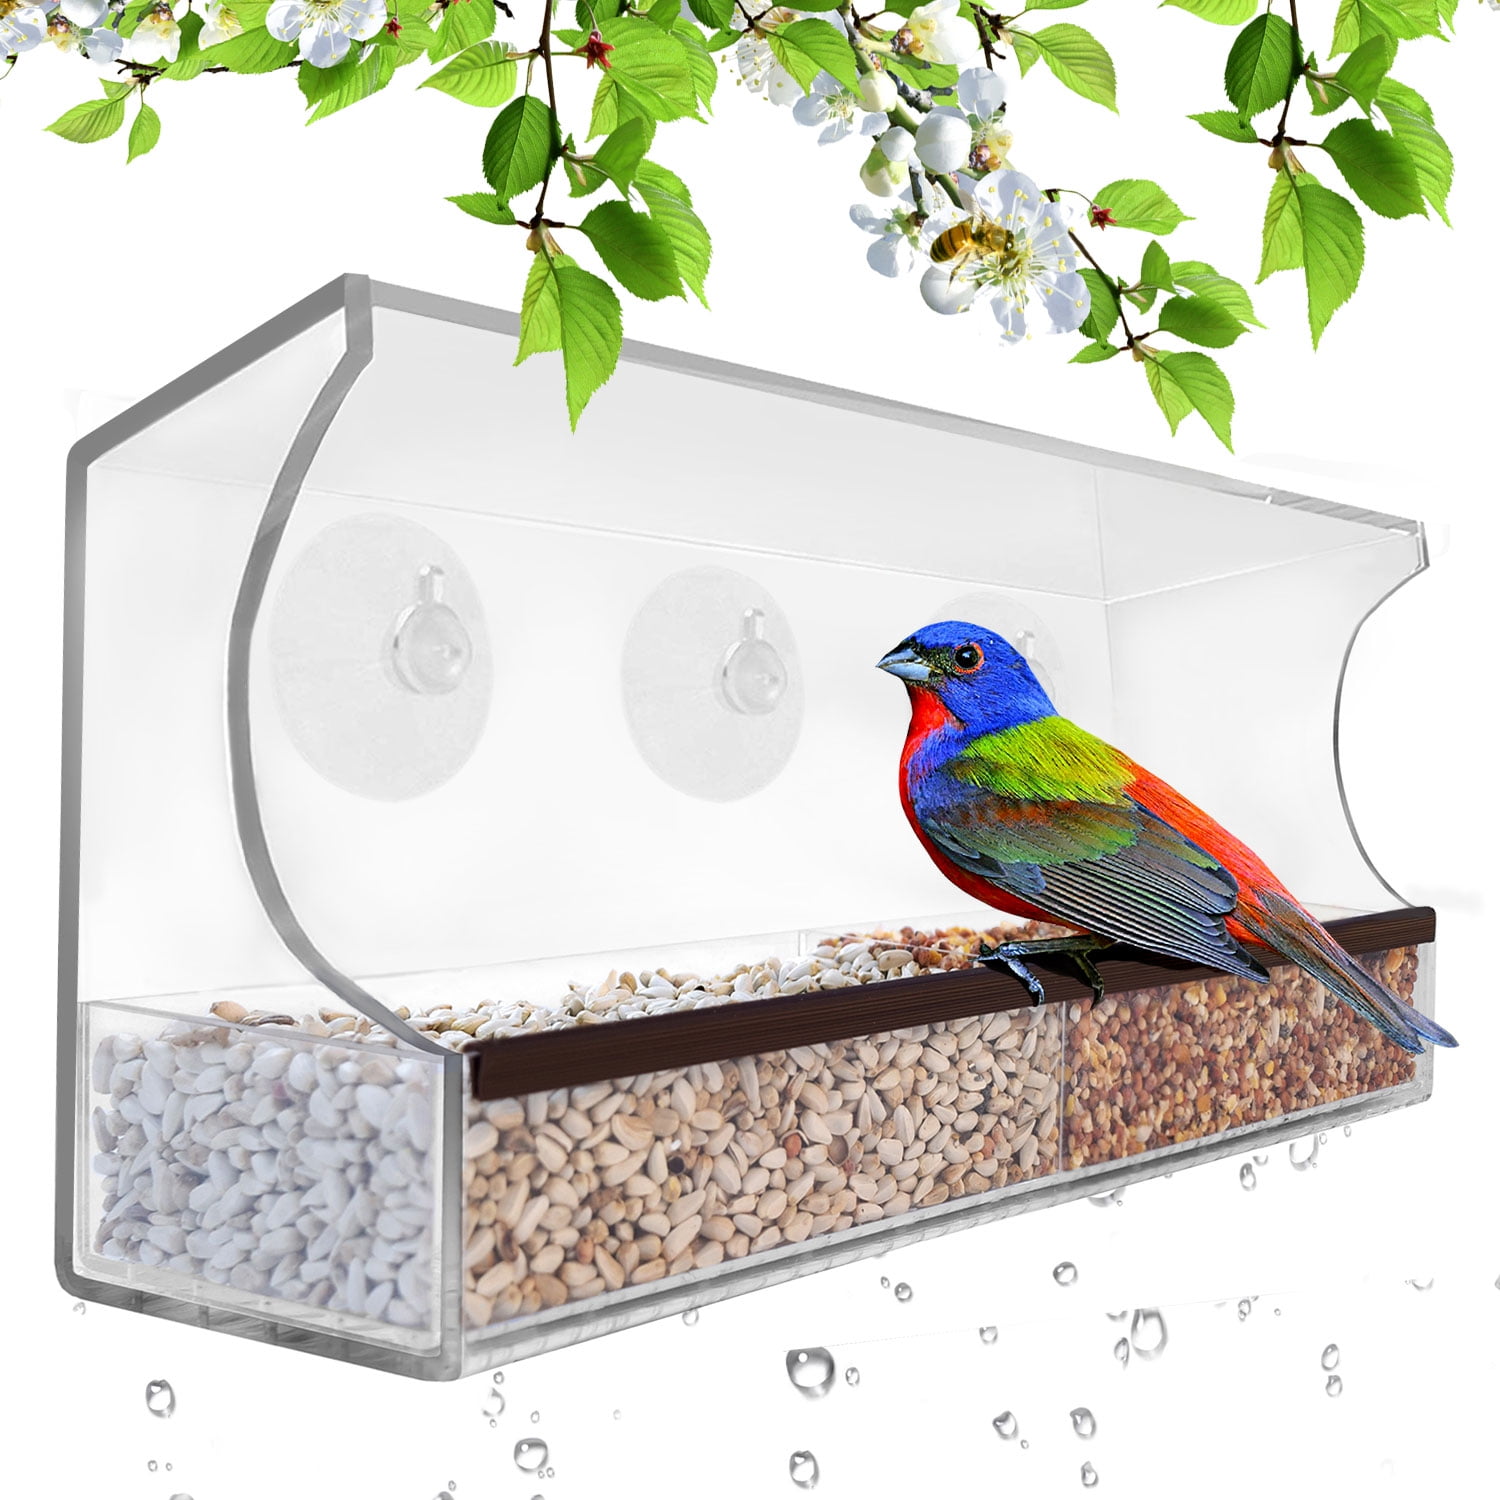 Deluxe Clear Window Bird Feeder, Large Wild Birdfeeder With Drain Holes,  Removable Tray, Super Strong Suction Cups, Transparent Viewing, Covered,  High Seed Capacity, Rubber Perch 